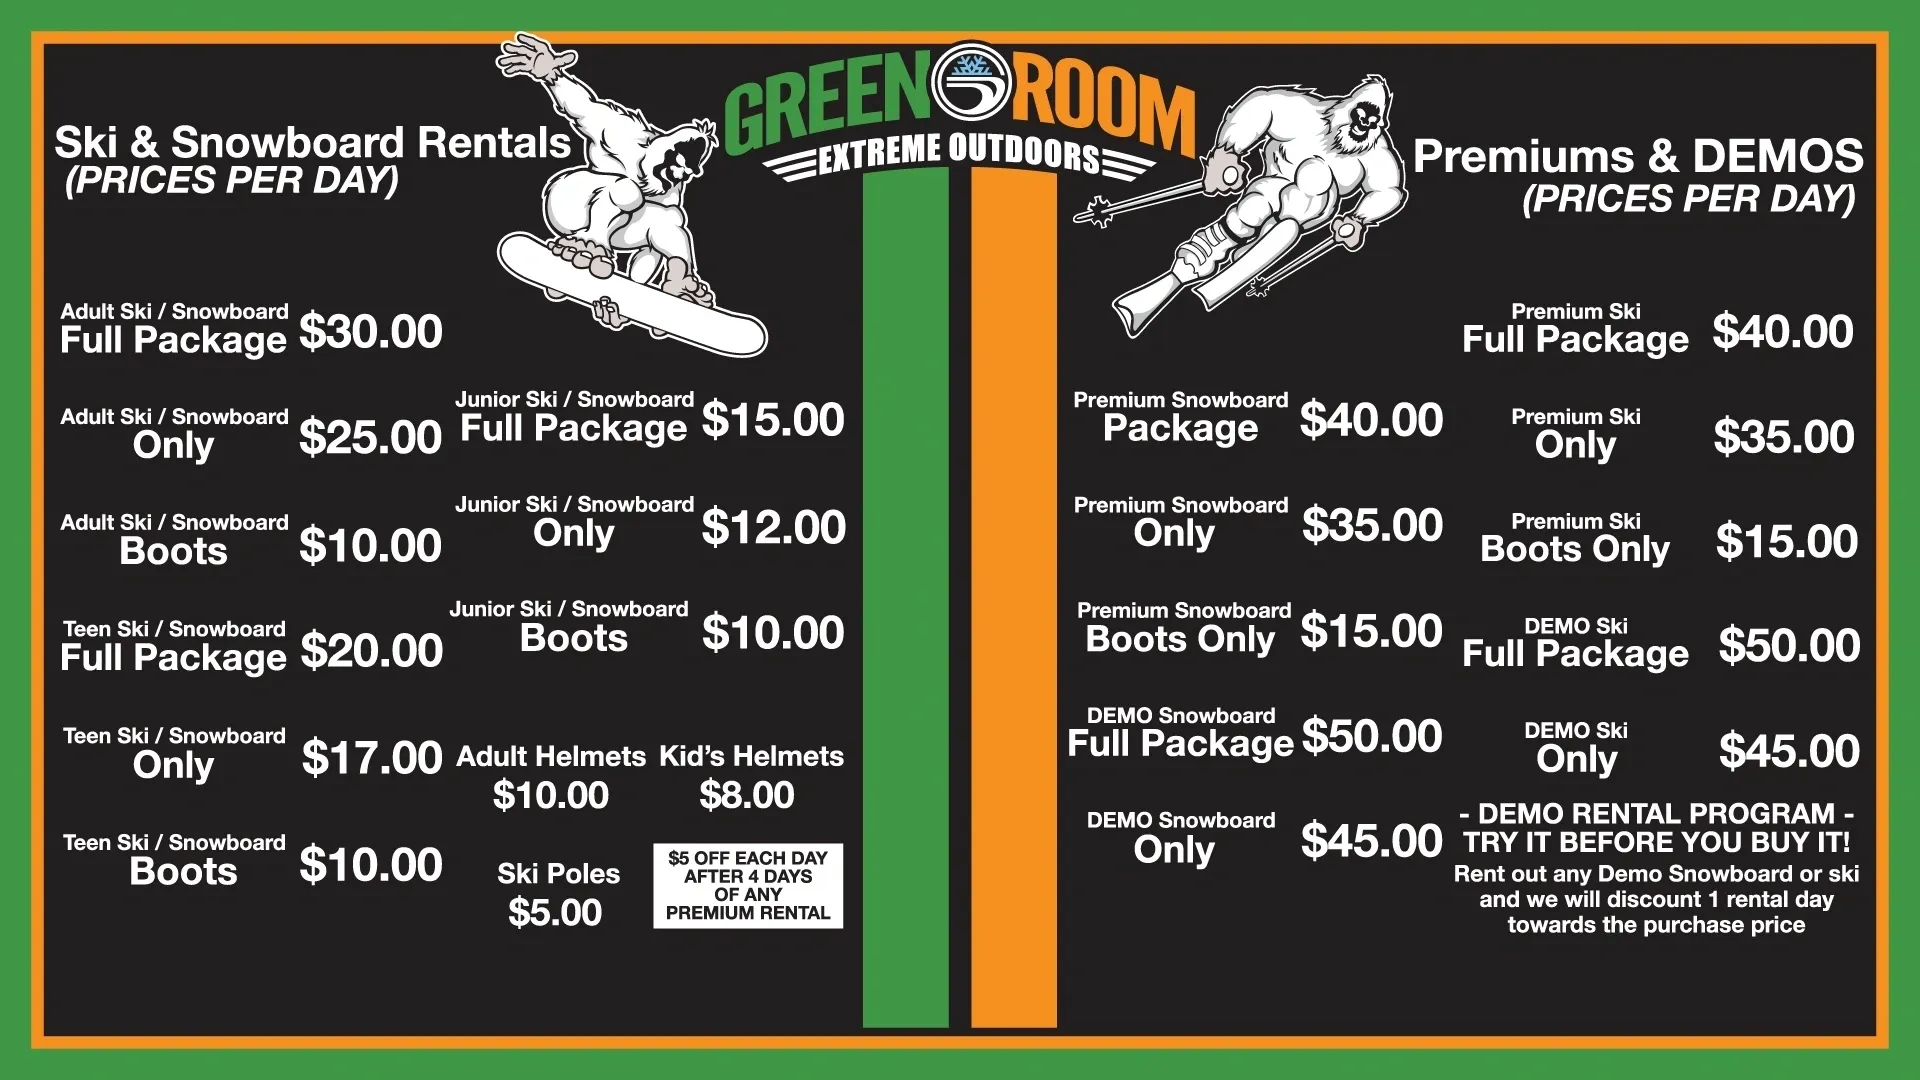 A green room menu with prices for ski equipment.